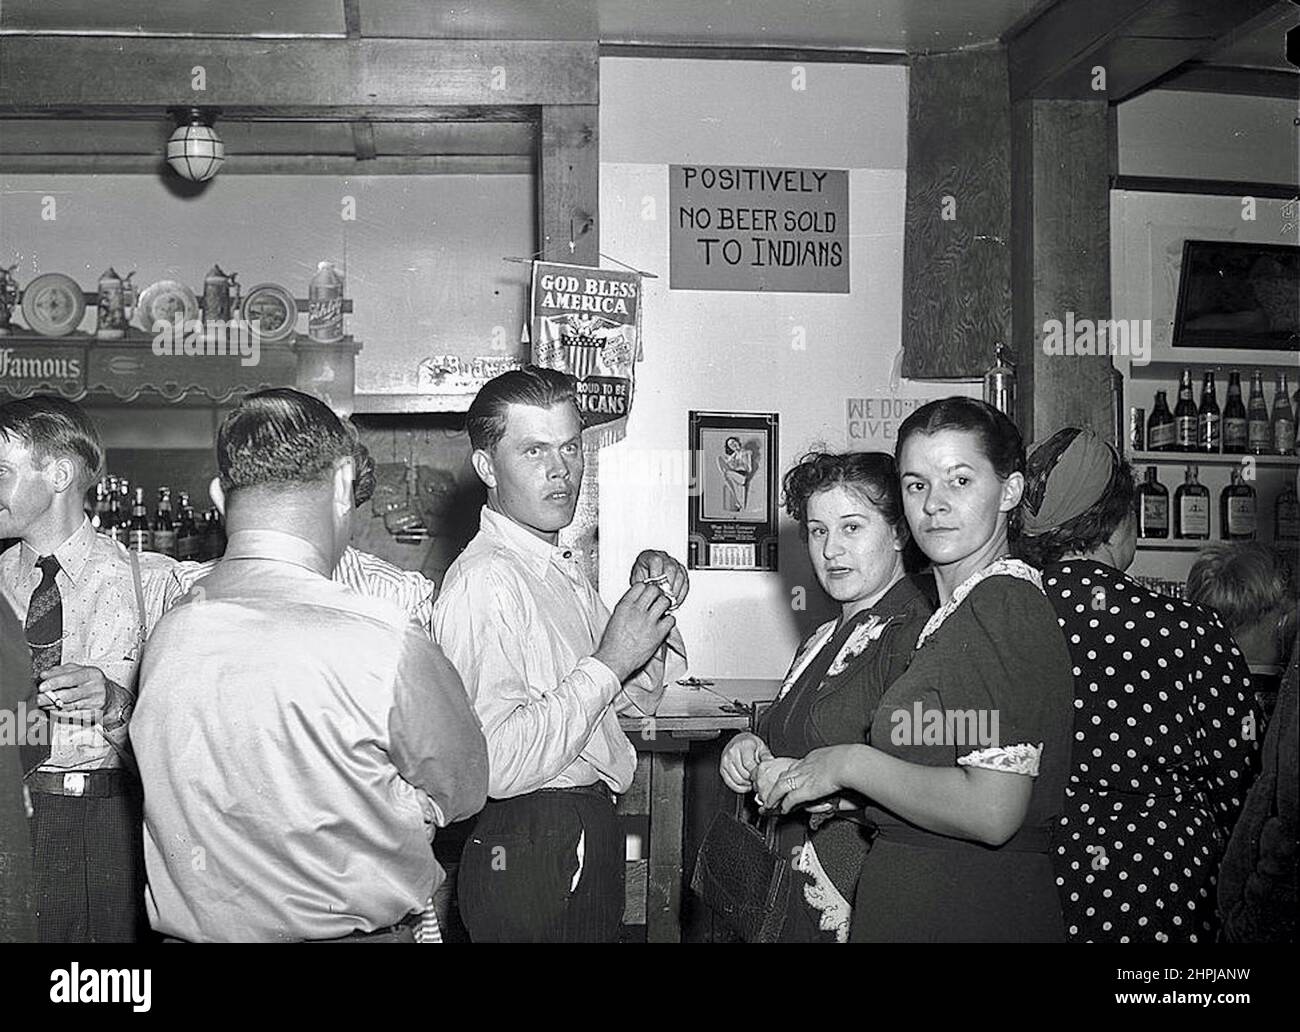 Marion Post Wolcott - Positively No Beer Sold to Indians - Signage in Birney, Montana bar - 1941 Stock Photo